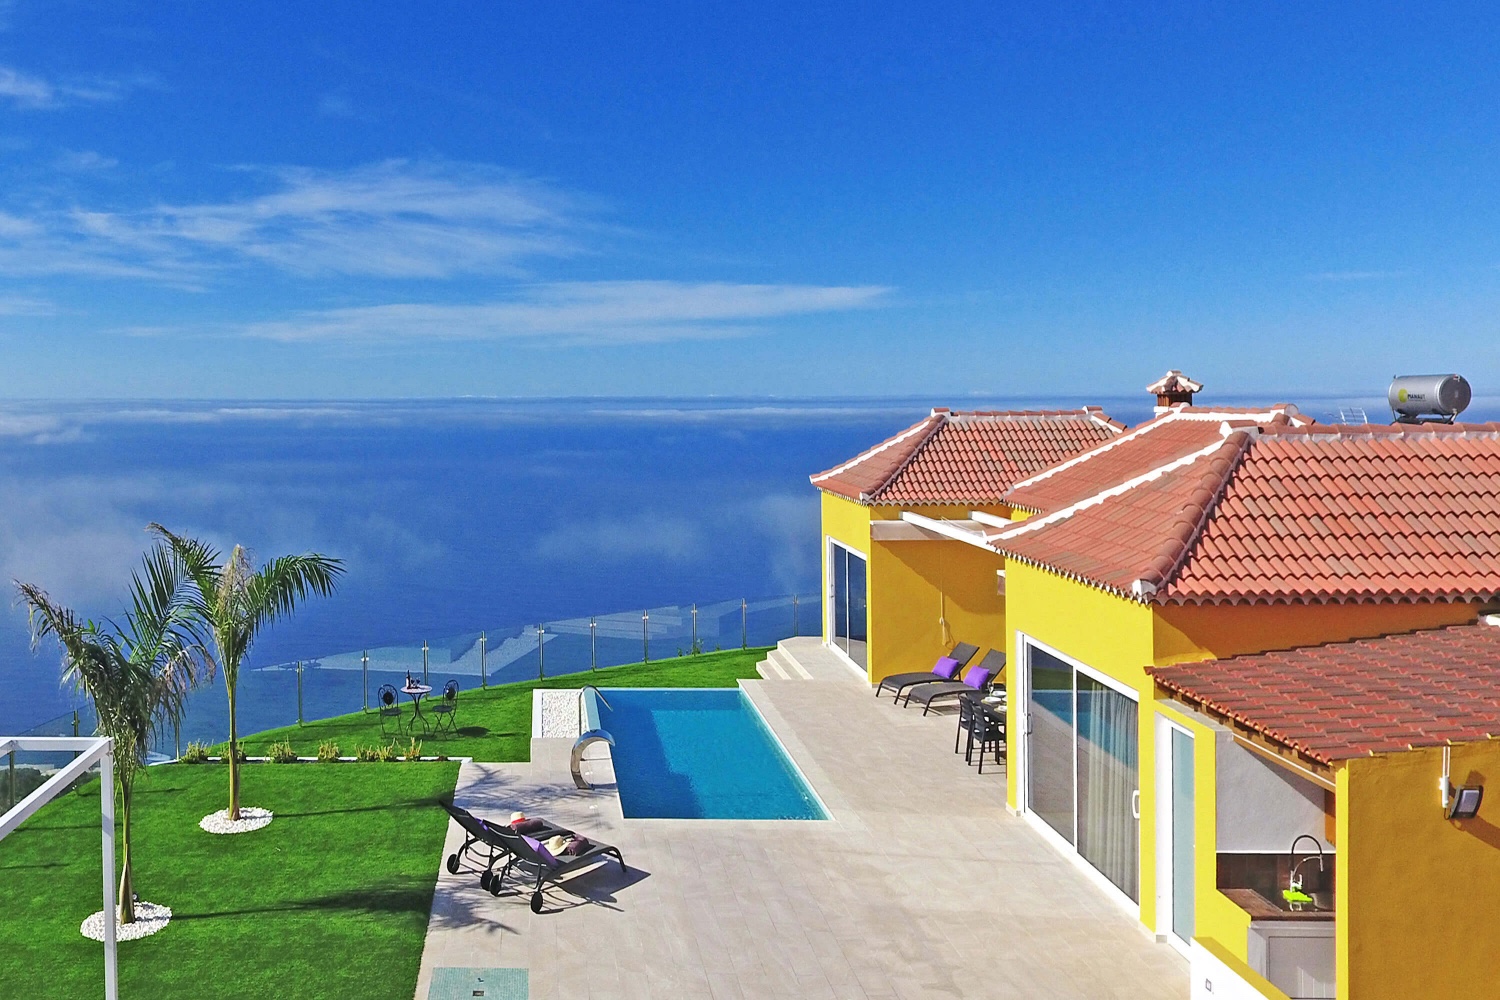 Modern holiday villa with sustainable energy system and all the comforts for a perfect stay with spectacular sea views.